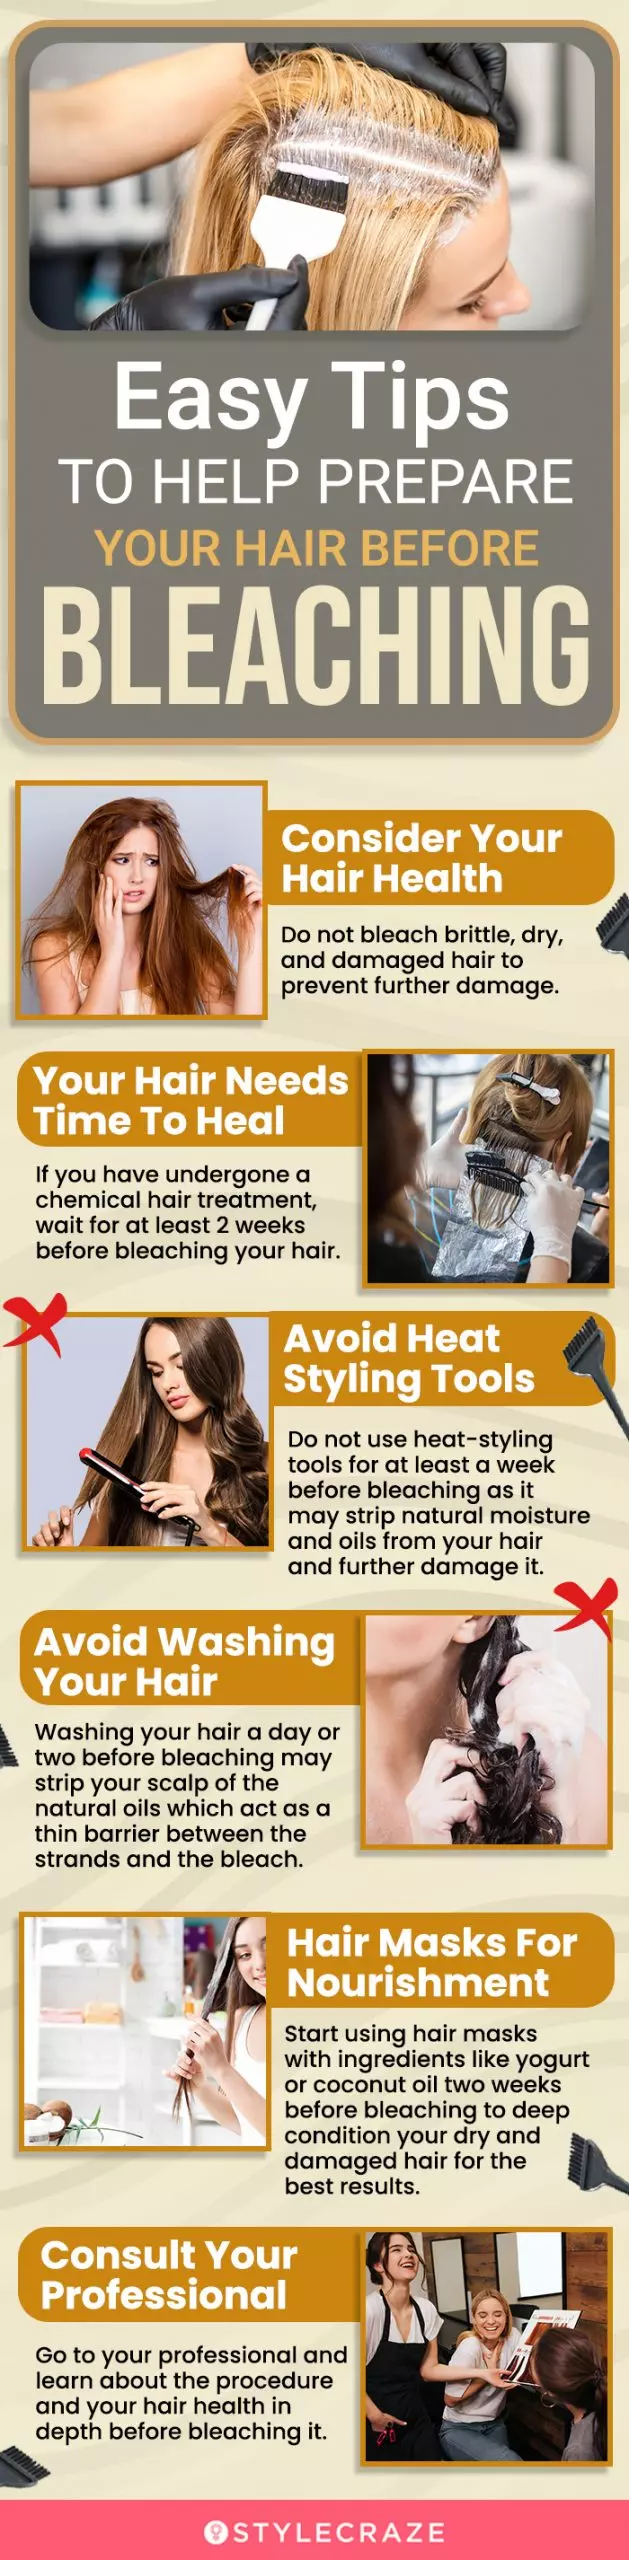 easy tips to help prepare your hair before bleaching (infographic)